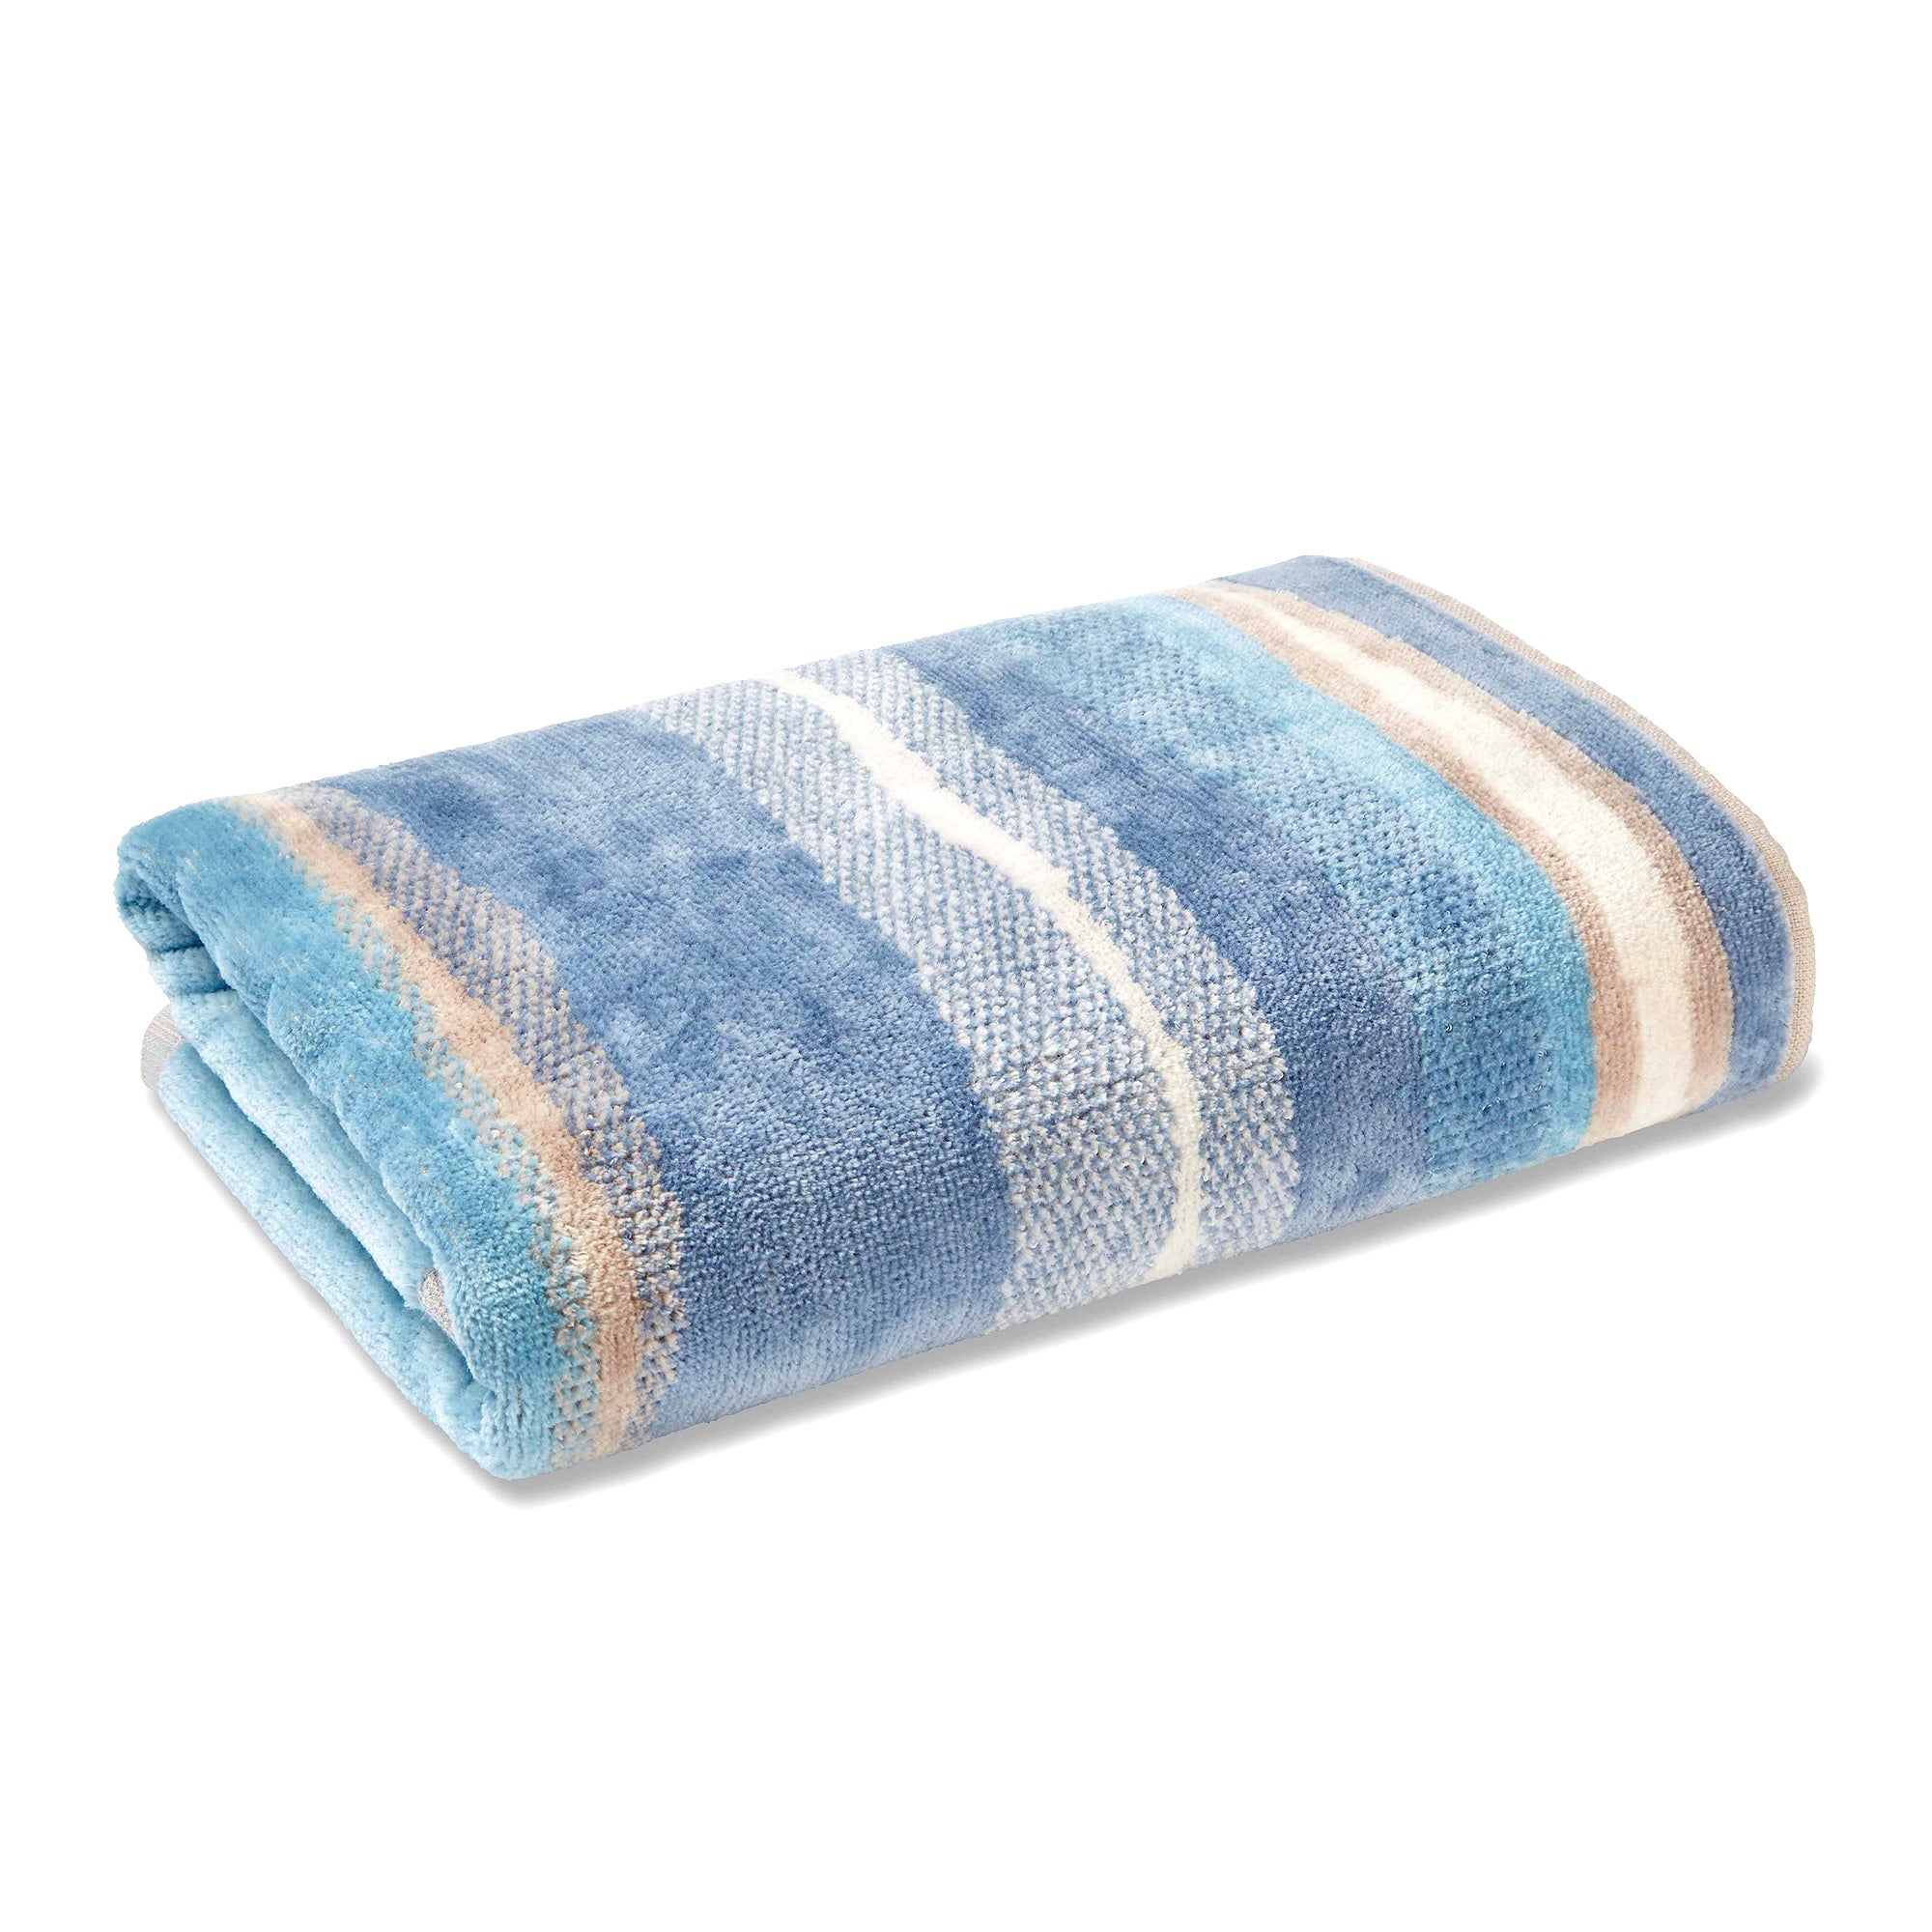 Towels | Hand and Bath Towels | Egyptian Cotton Towels | Dunelm - Page 4